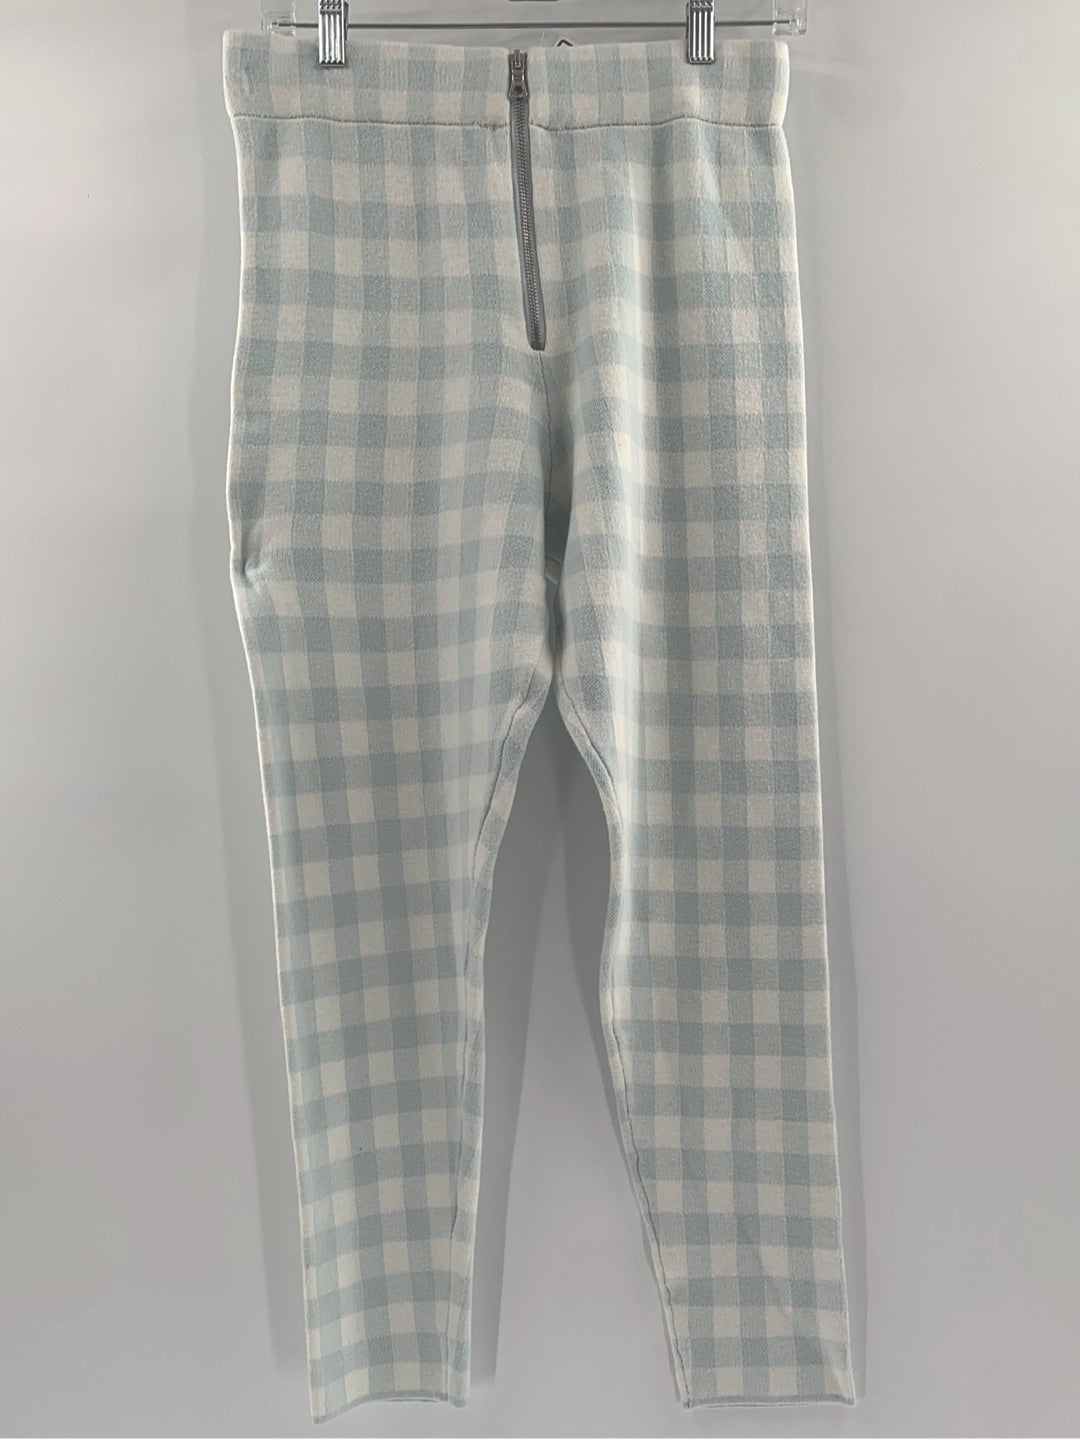 Urban Outfitters Knit Plaid Pants (Size L)